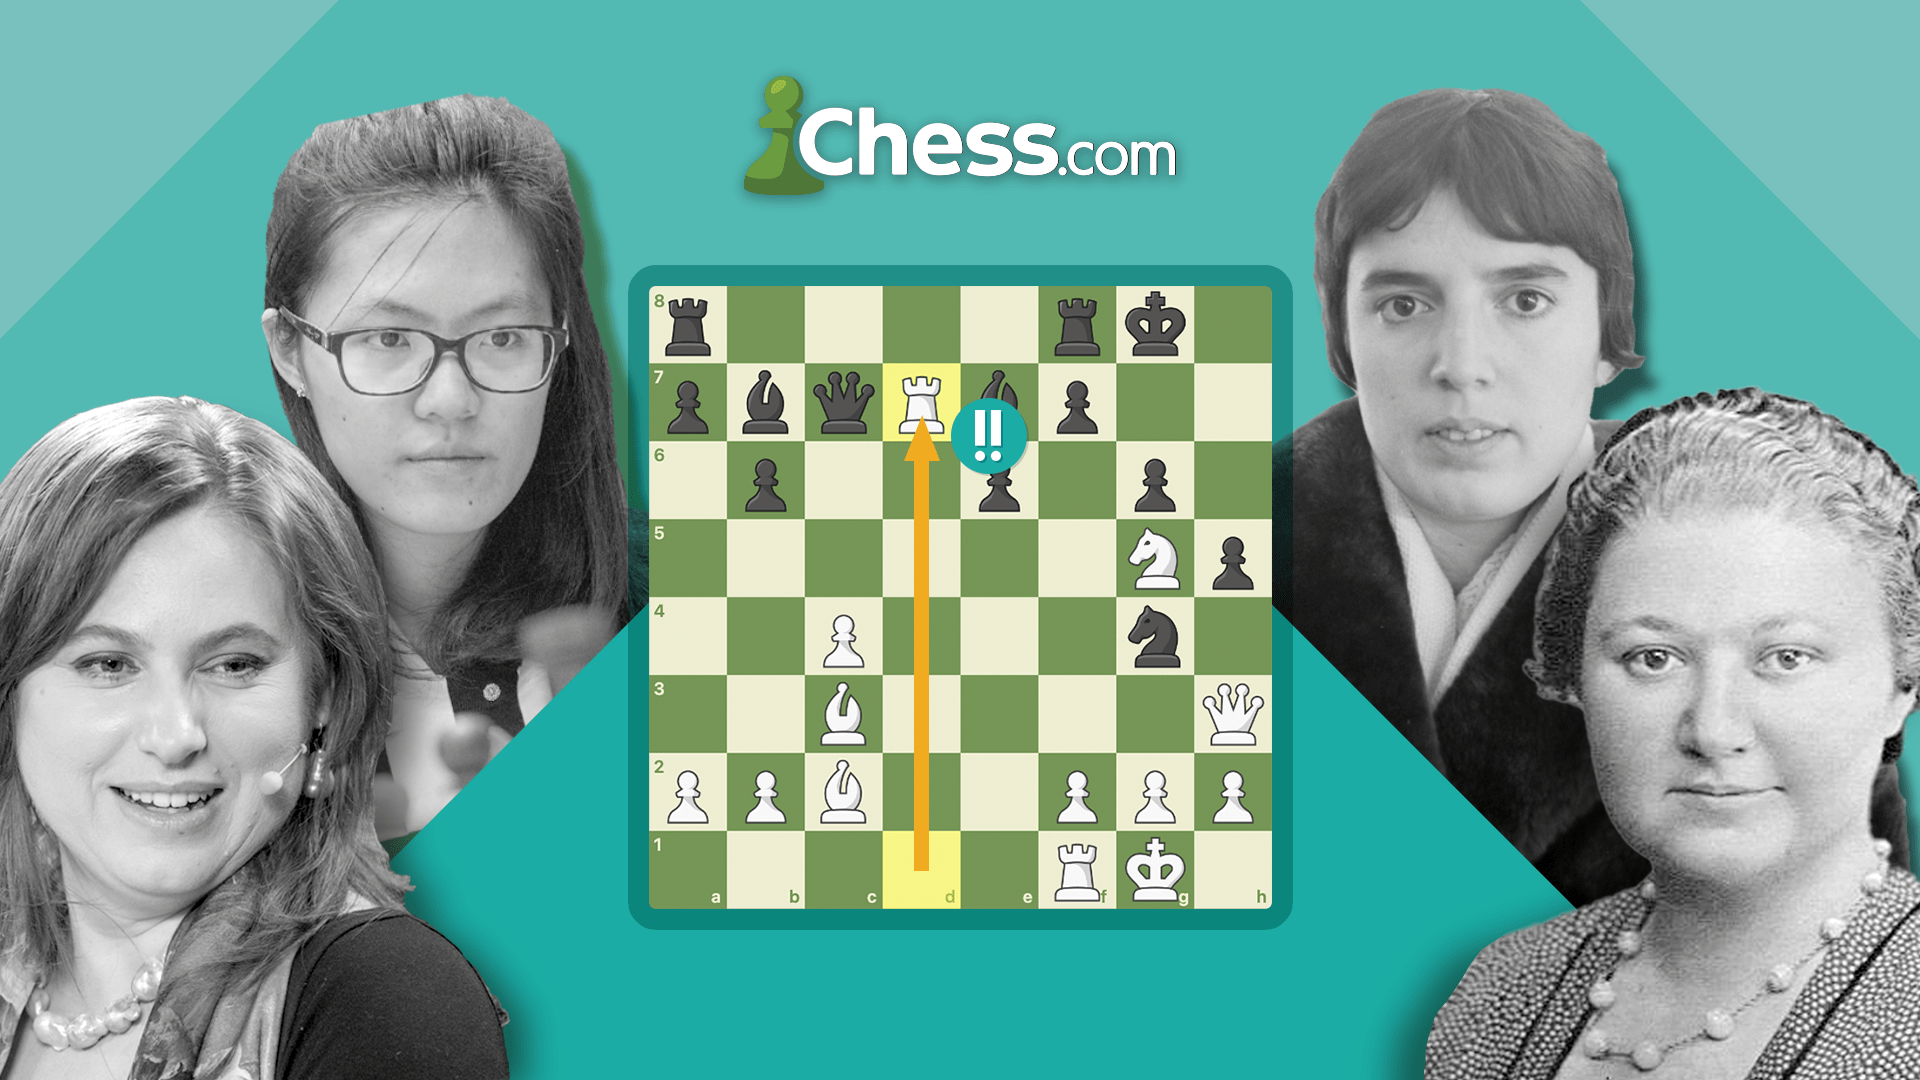 Master Your Chess with Judit Polgar - Part 2